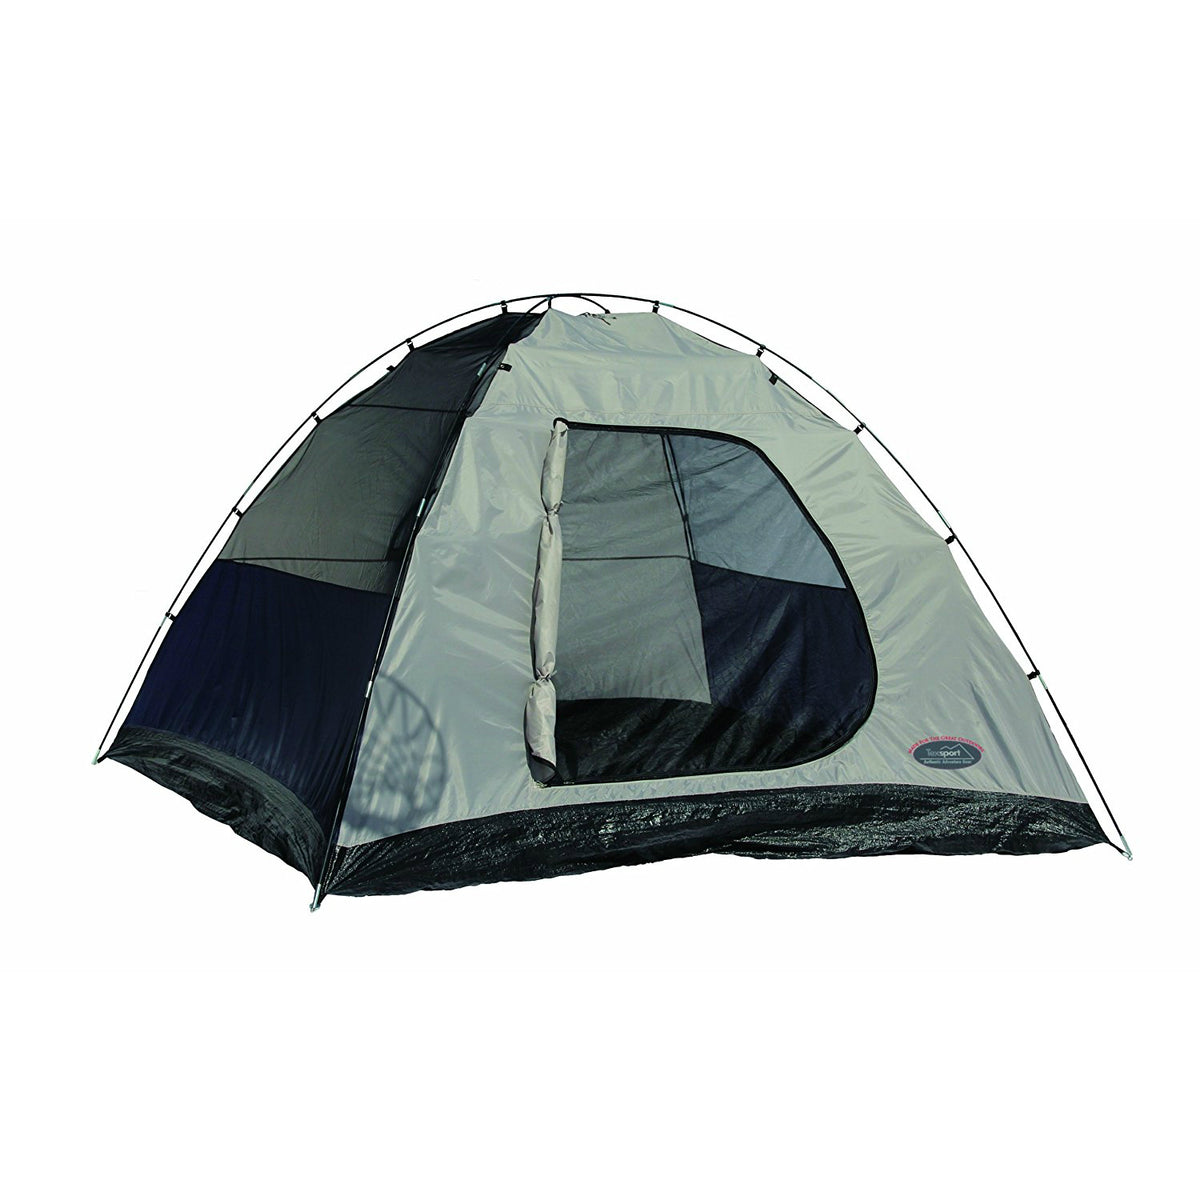 Texsport 01108 5 Person Branch Canyon Dome Family Camping Backpacking Tent